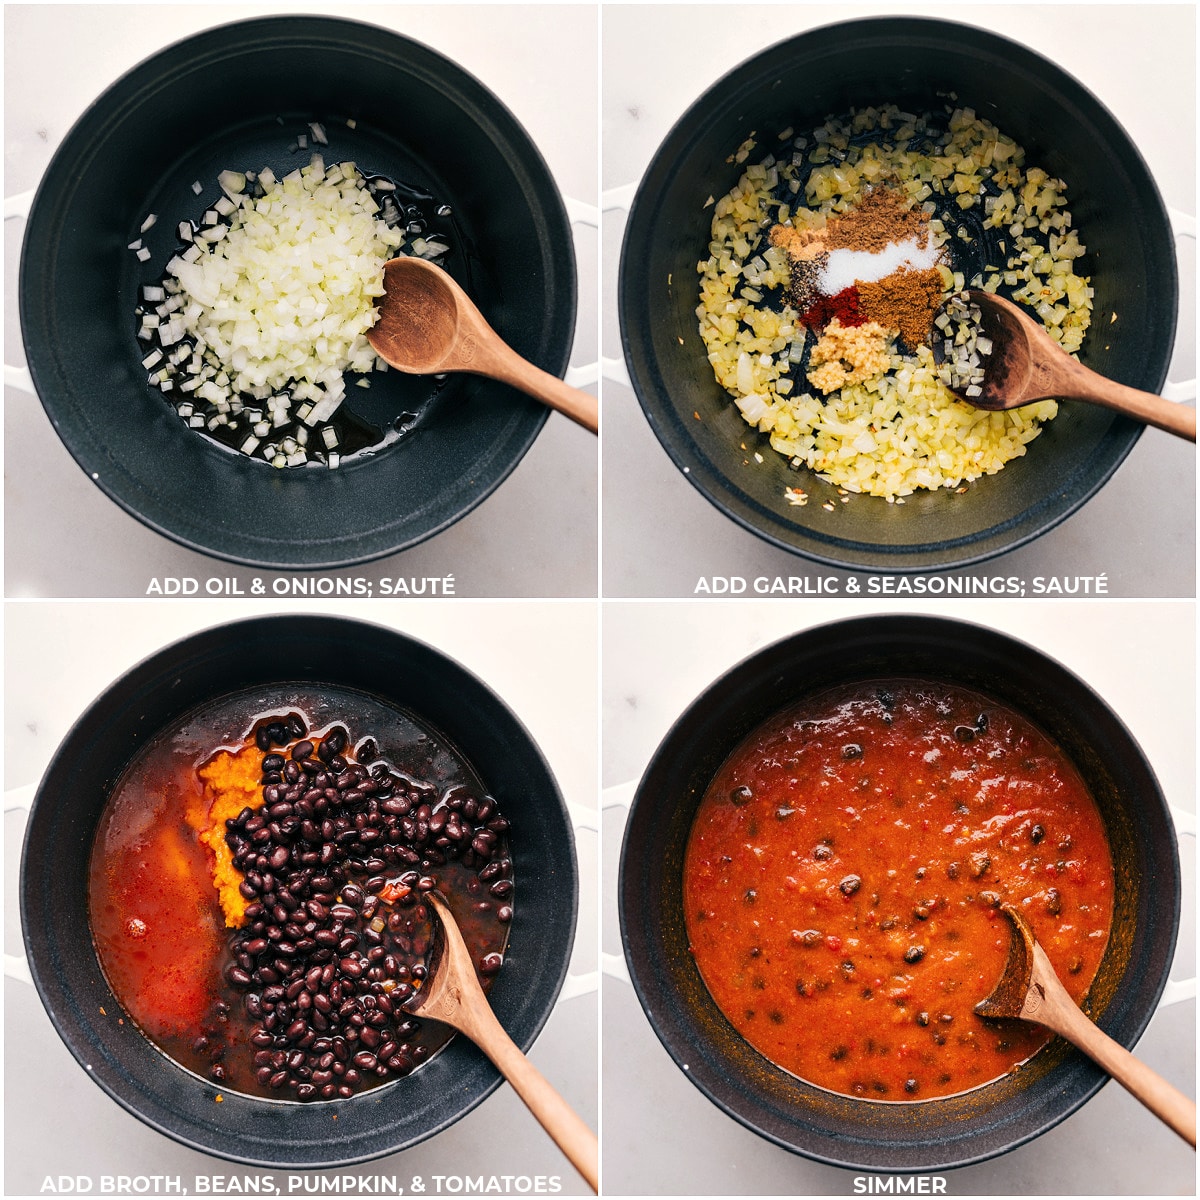 Step-by-step images showcasing the sautéing of onions, garlic, and seasonings, followed by the addition of broth, beans, pumpkin, and tomatoes, and simmering the mixture.